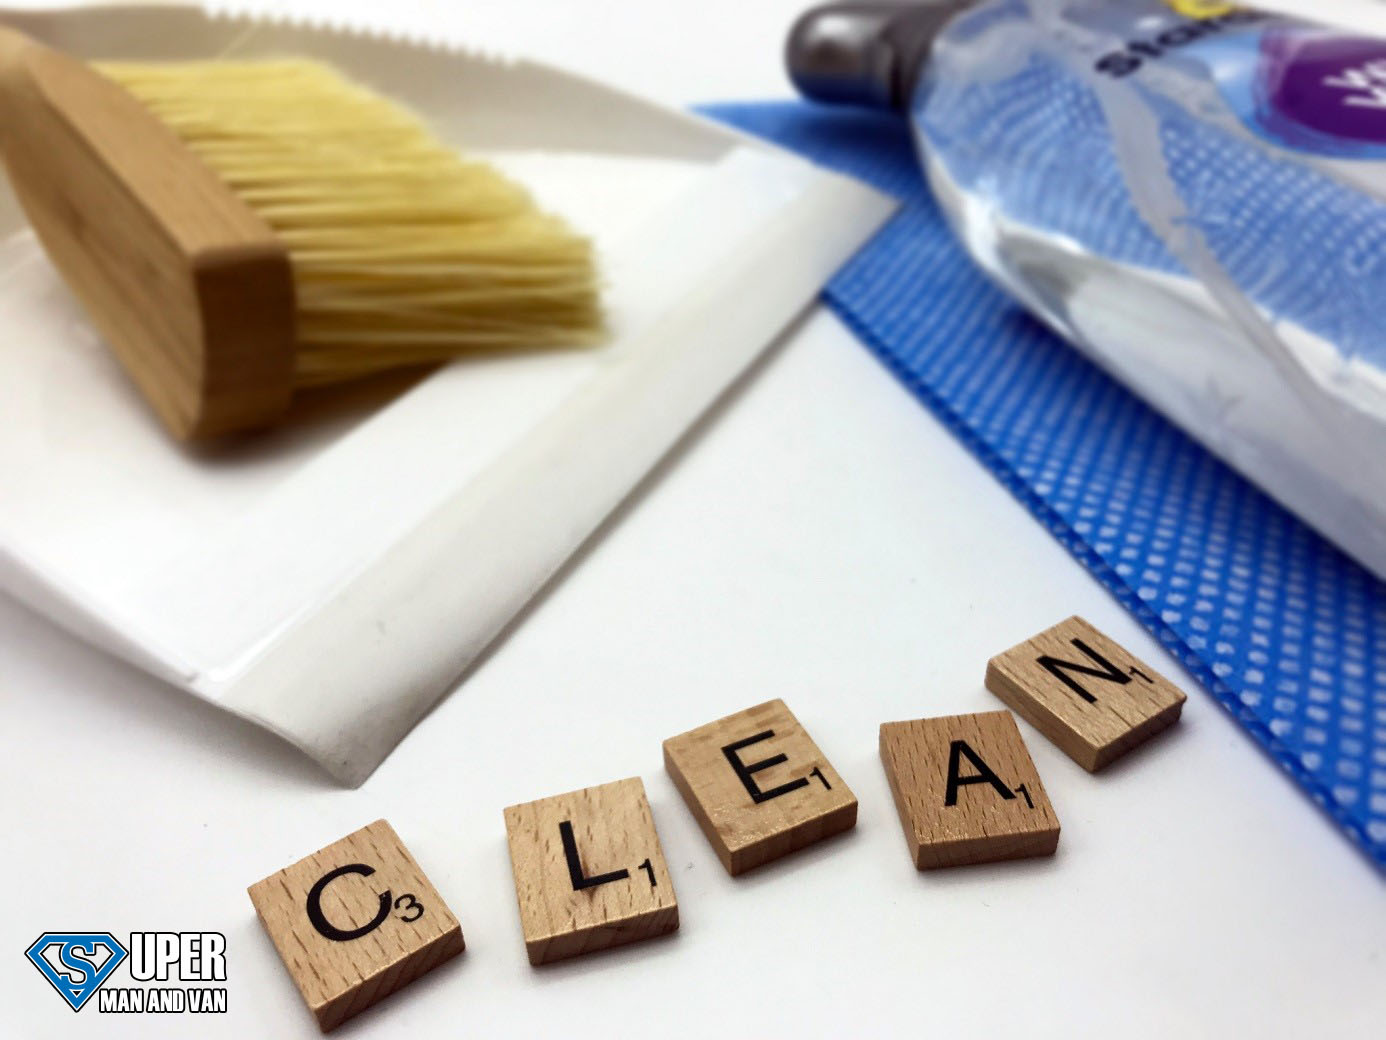 Cleaning Is Stressing You Out? Not Anymore